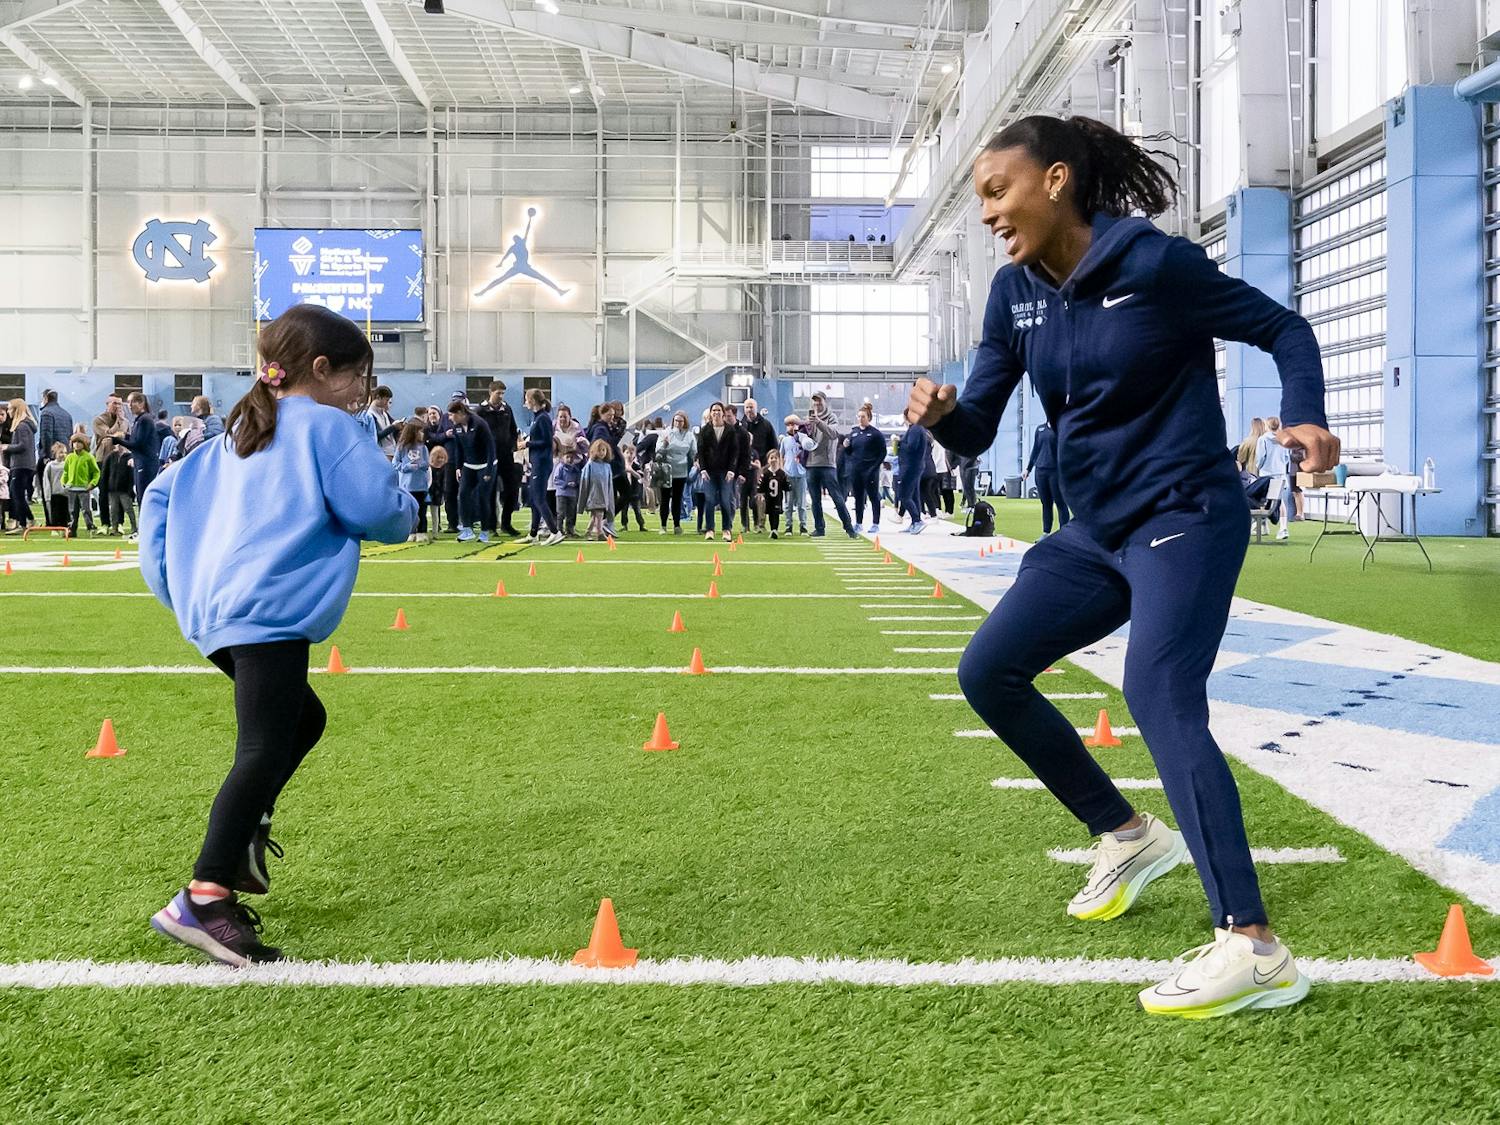 UNC junior high jumper Sydney Banks races Emma Walters at the National Girls & Women in Sports Day event held at the Bill Koman Practice on Sunday, Jan. 22, 2023.